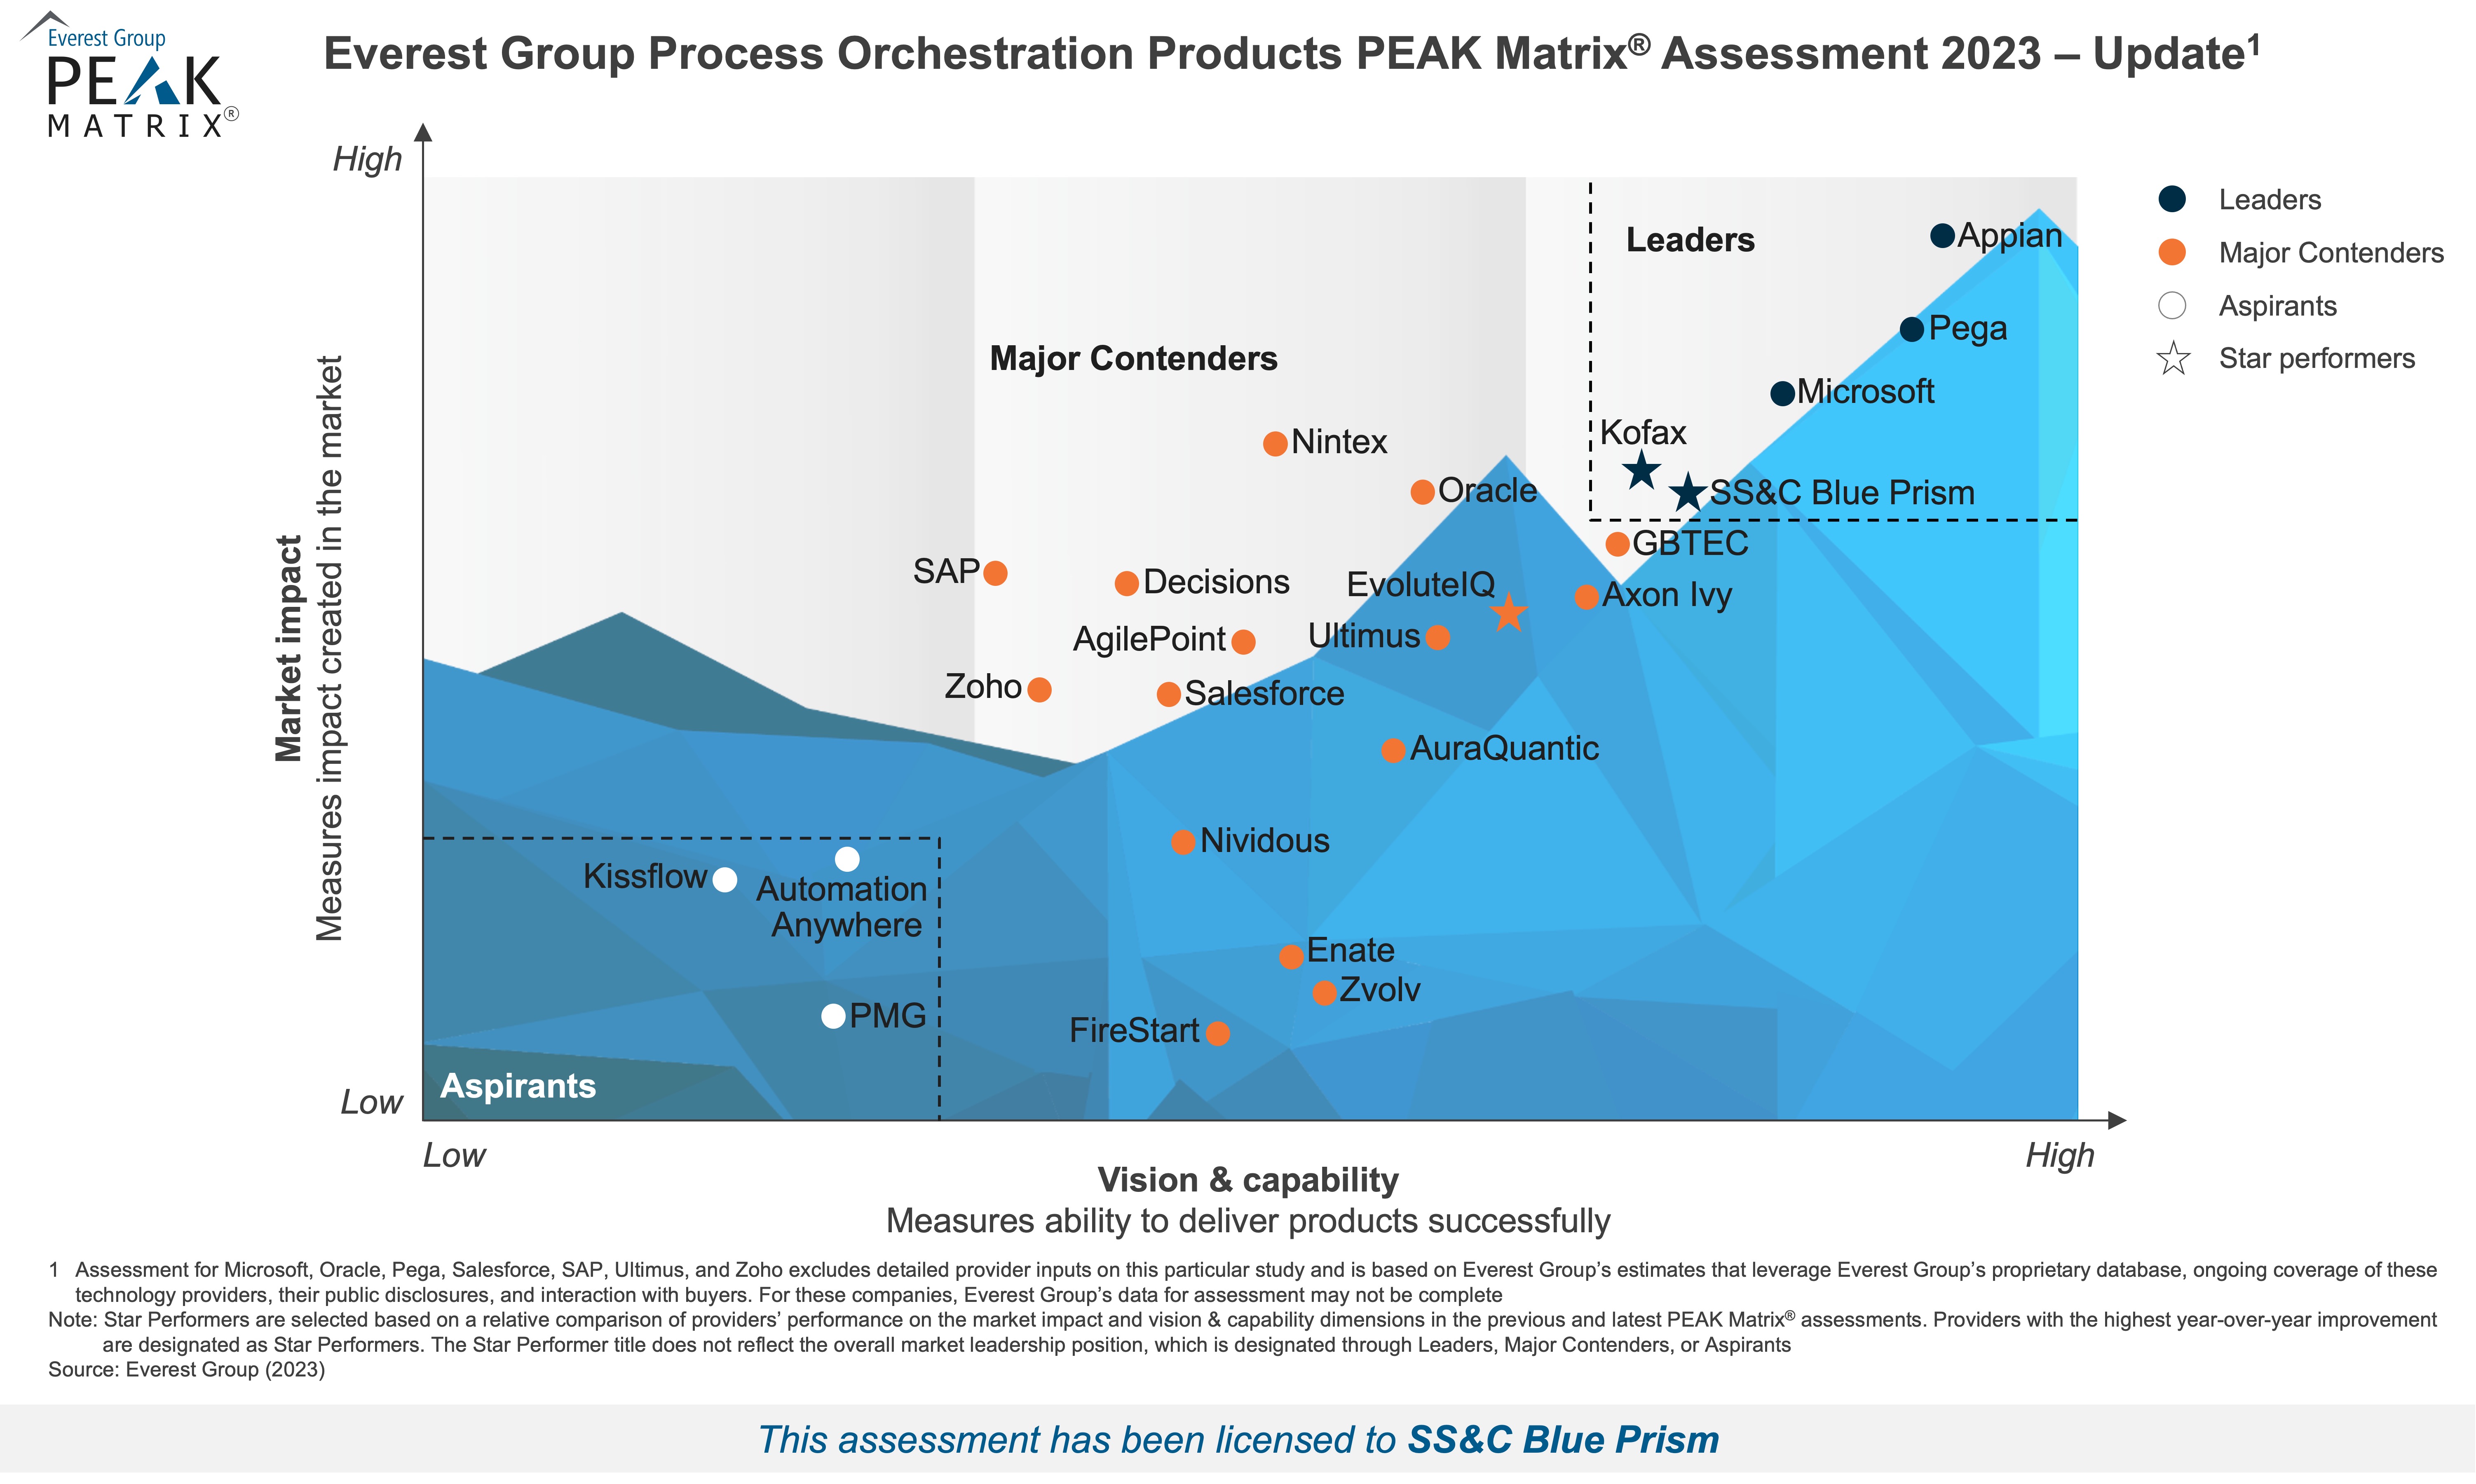 Everest Group Process Orchestration Products PEAK Matrix Assessment 2023 - Update